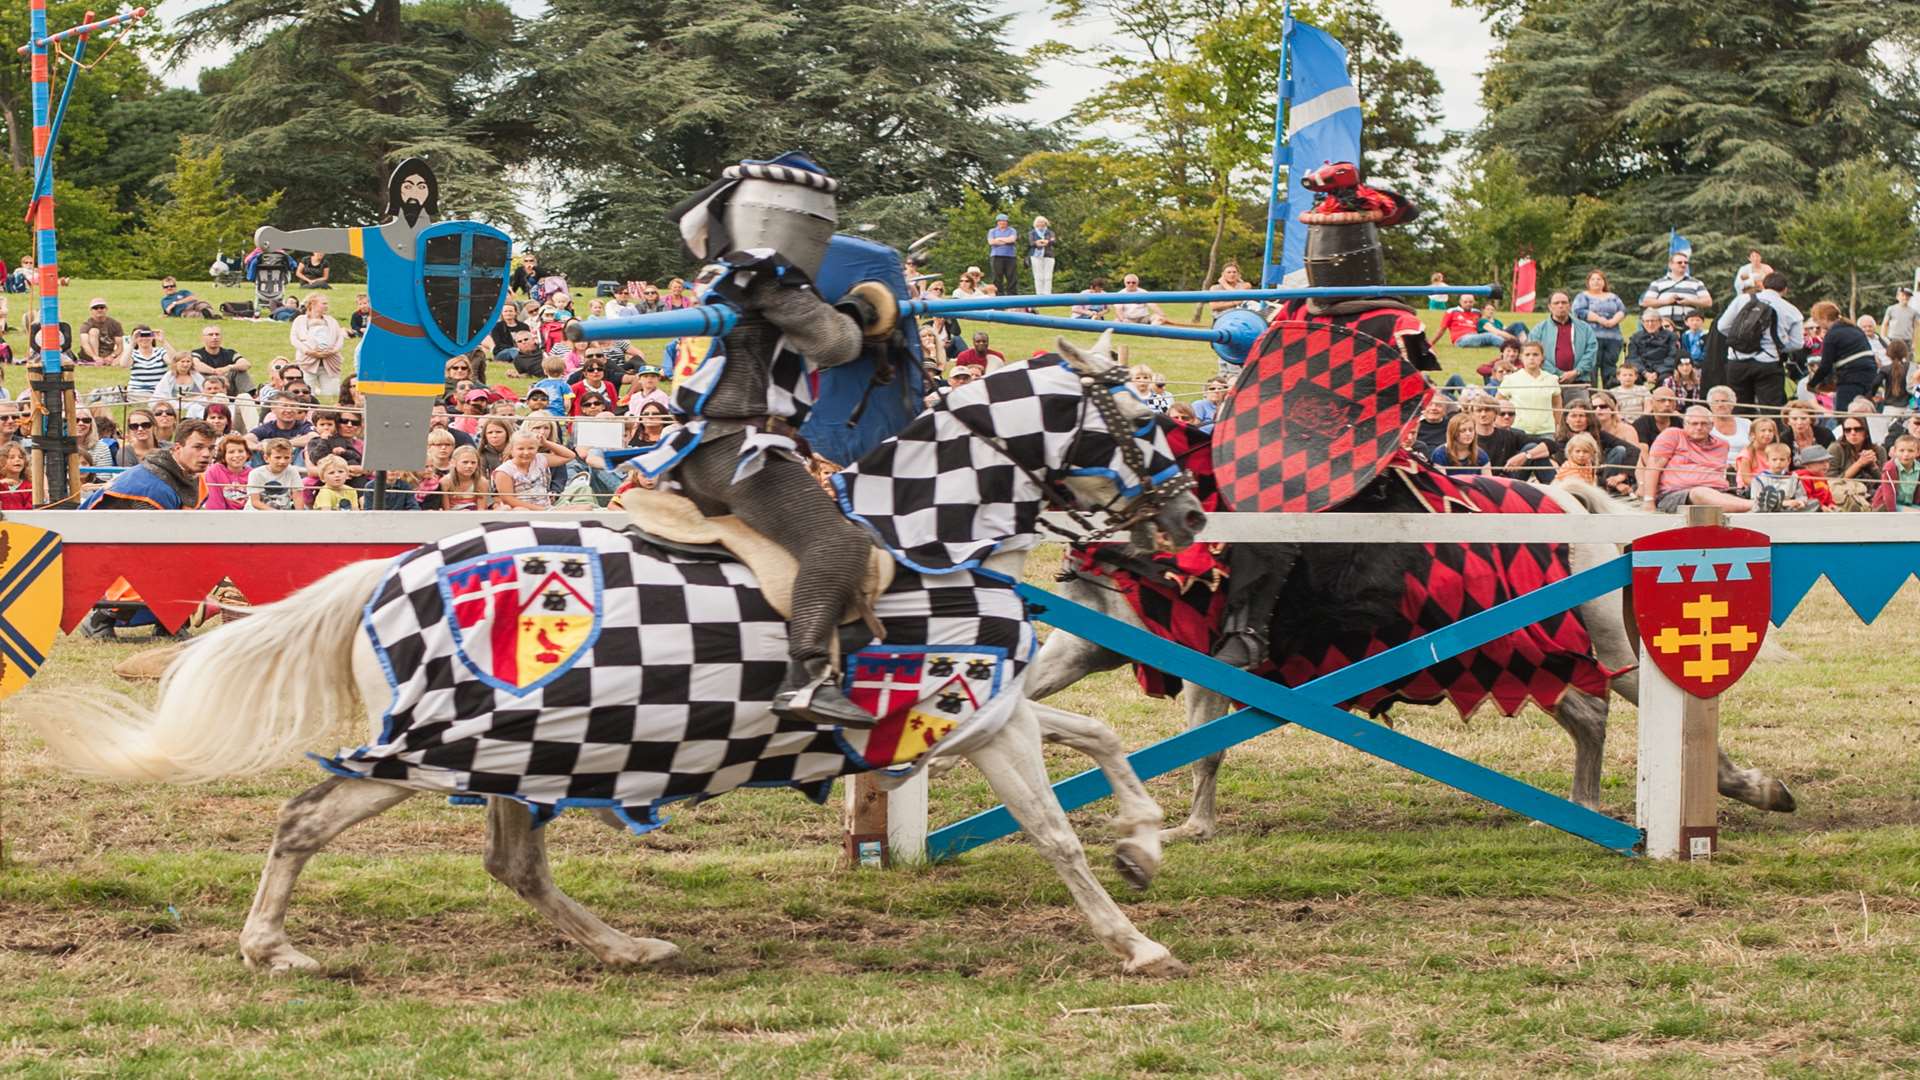 There'll be jousting at Hever Castle on weekends throughout the summer holidays